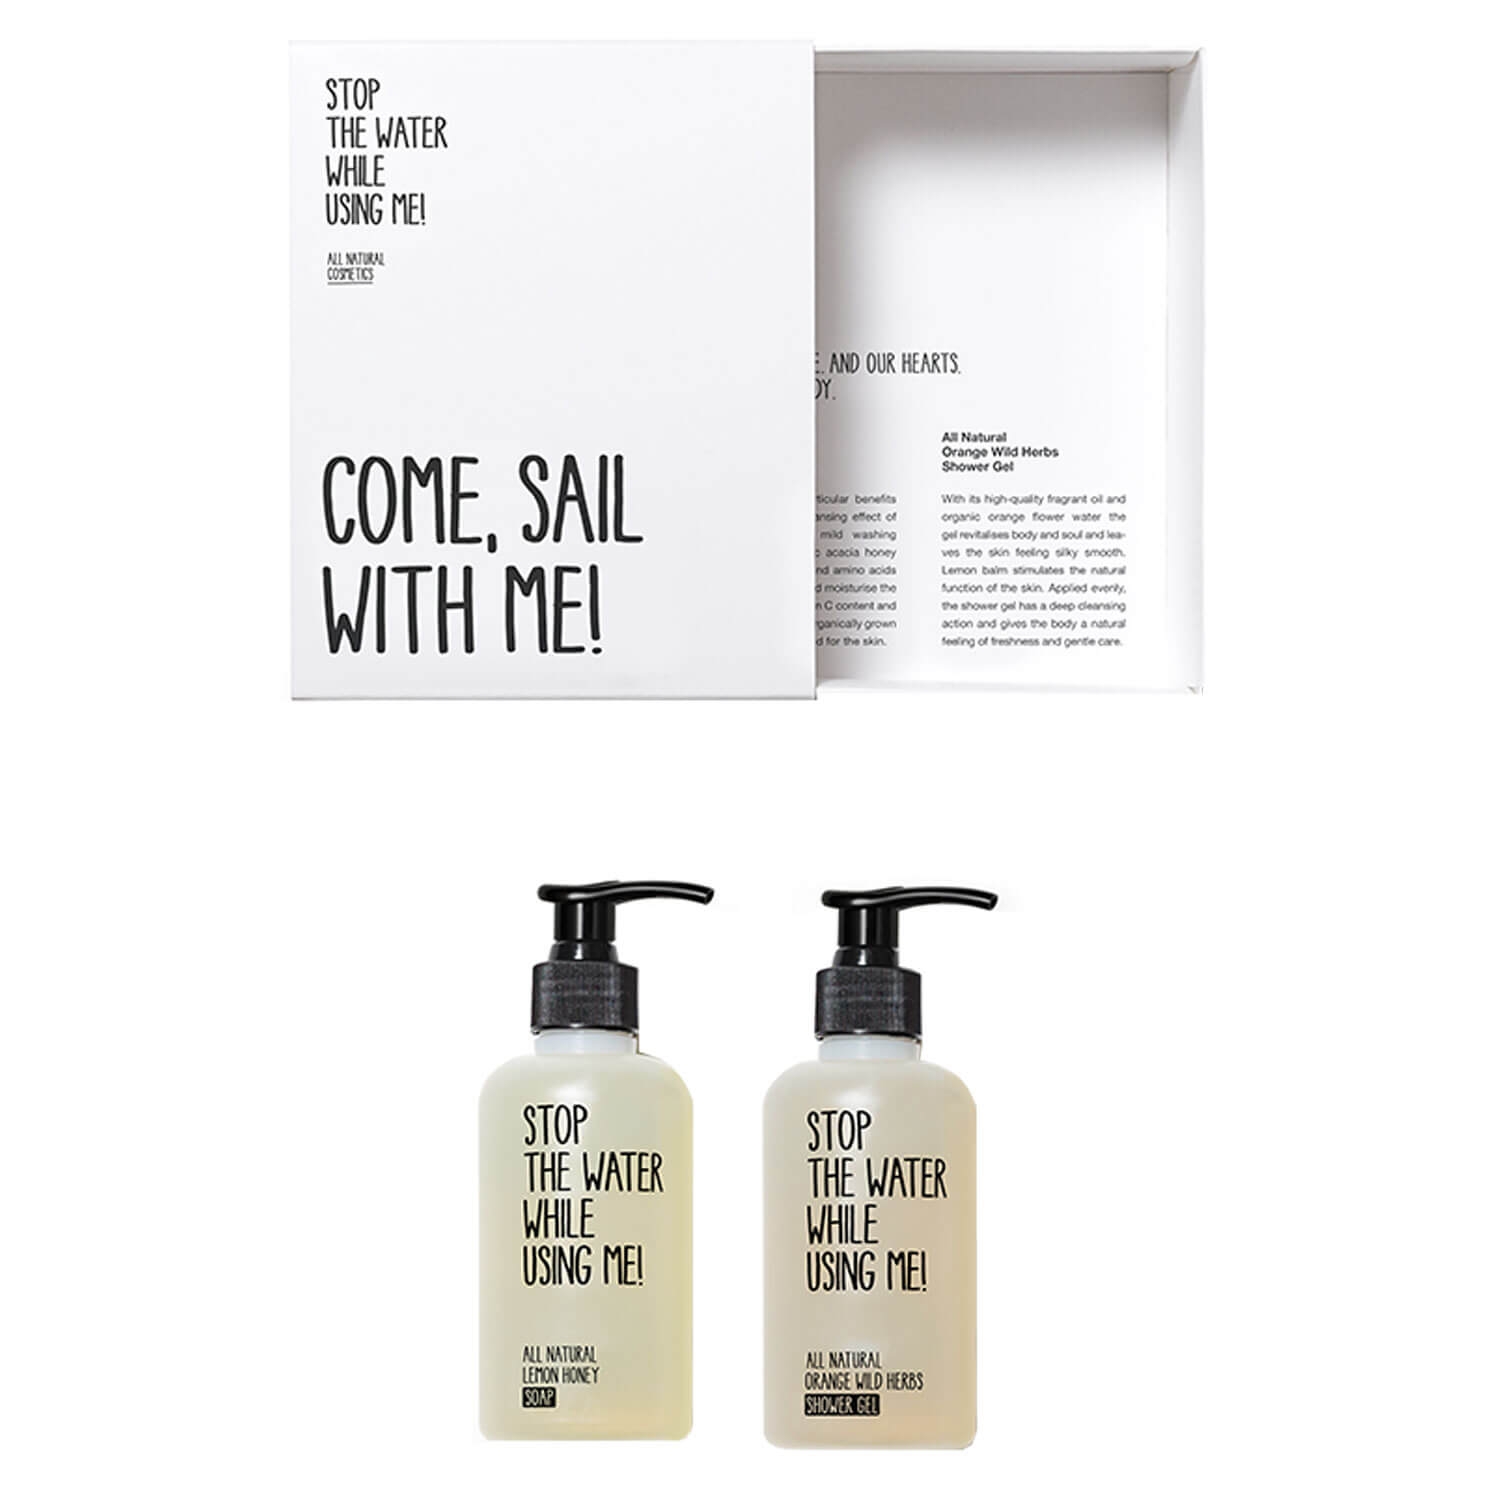 Product image from All Natural Body - Come, Sail With Me! Kit